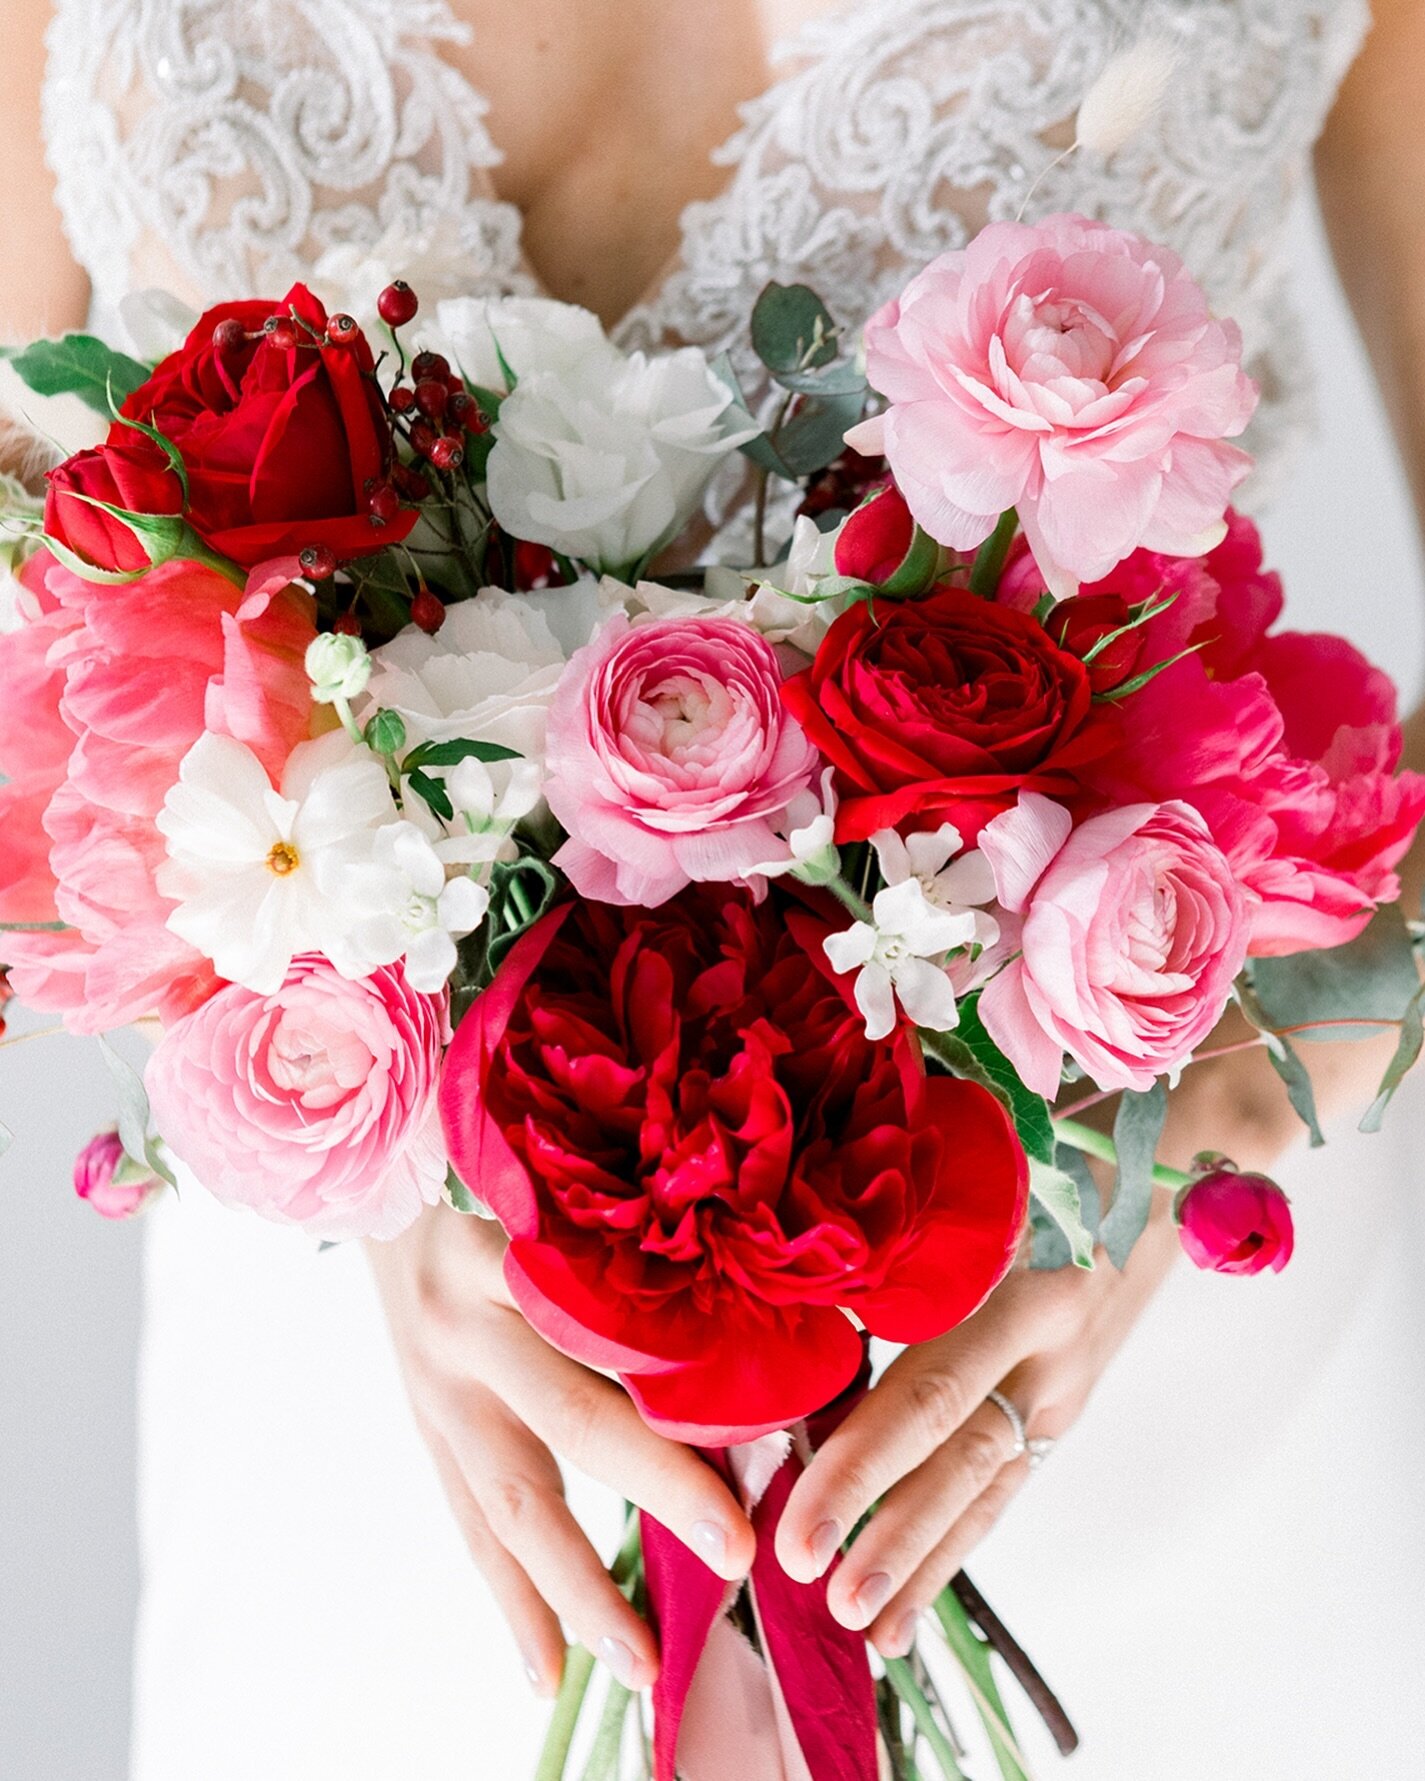 While a wedding bouquet is a classic and beautiful tradition, flowers can play so many more roles in your special day. Picture lush floral arches framing your vows, table centerpieces that create an enchanting atmosphere, or even a petal-strewn aisle